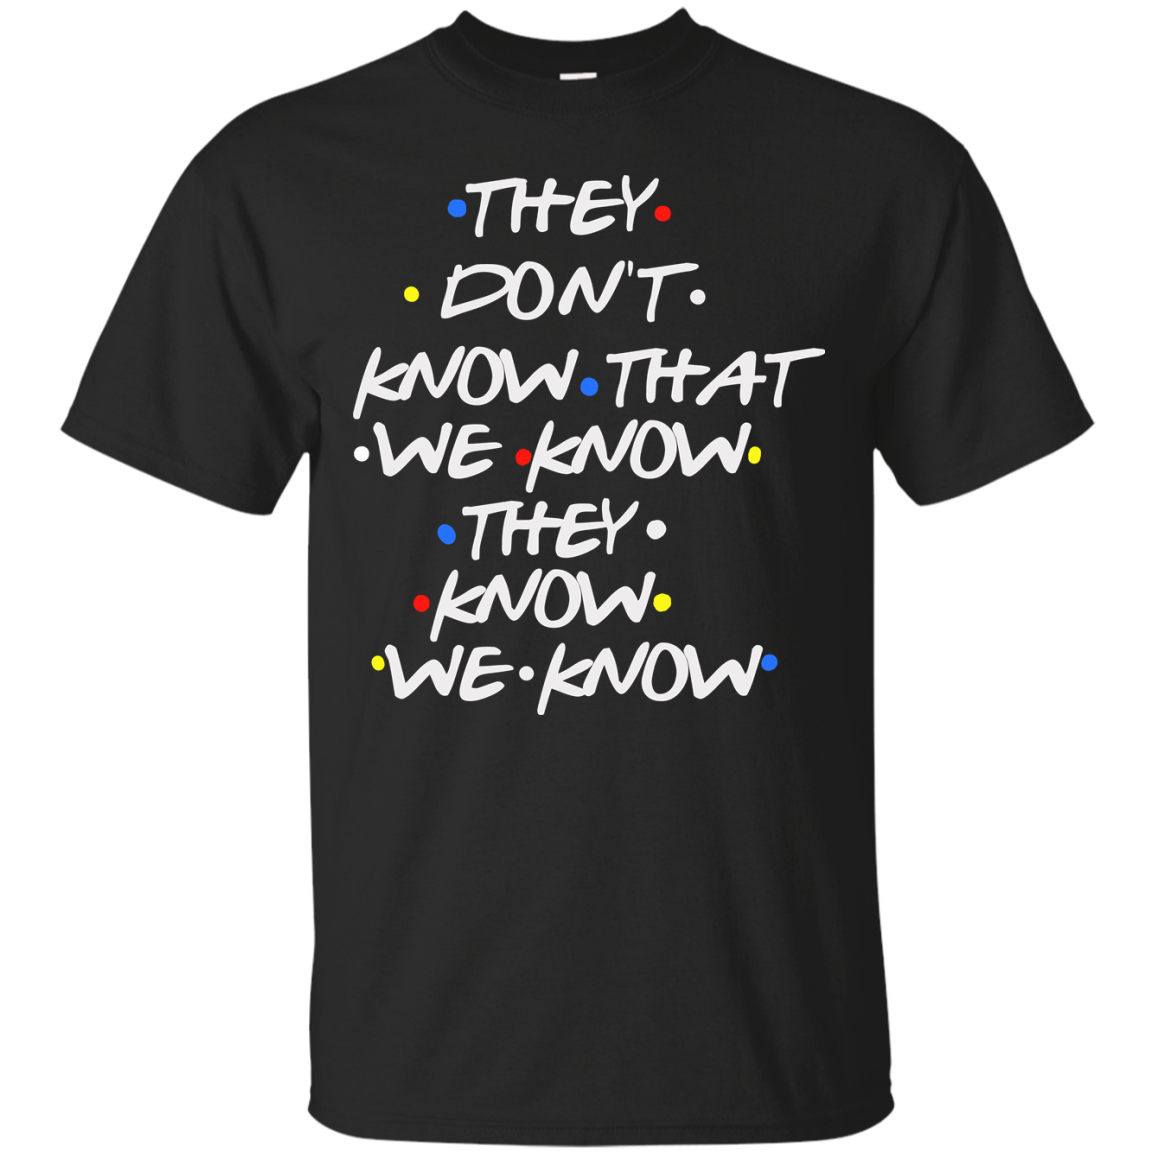 Friends: they don't know that we know shirt, tank top